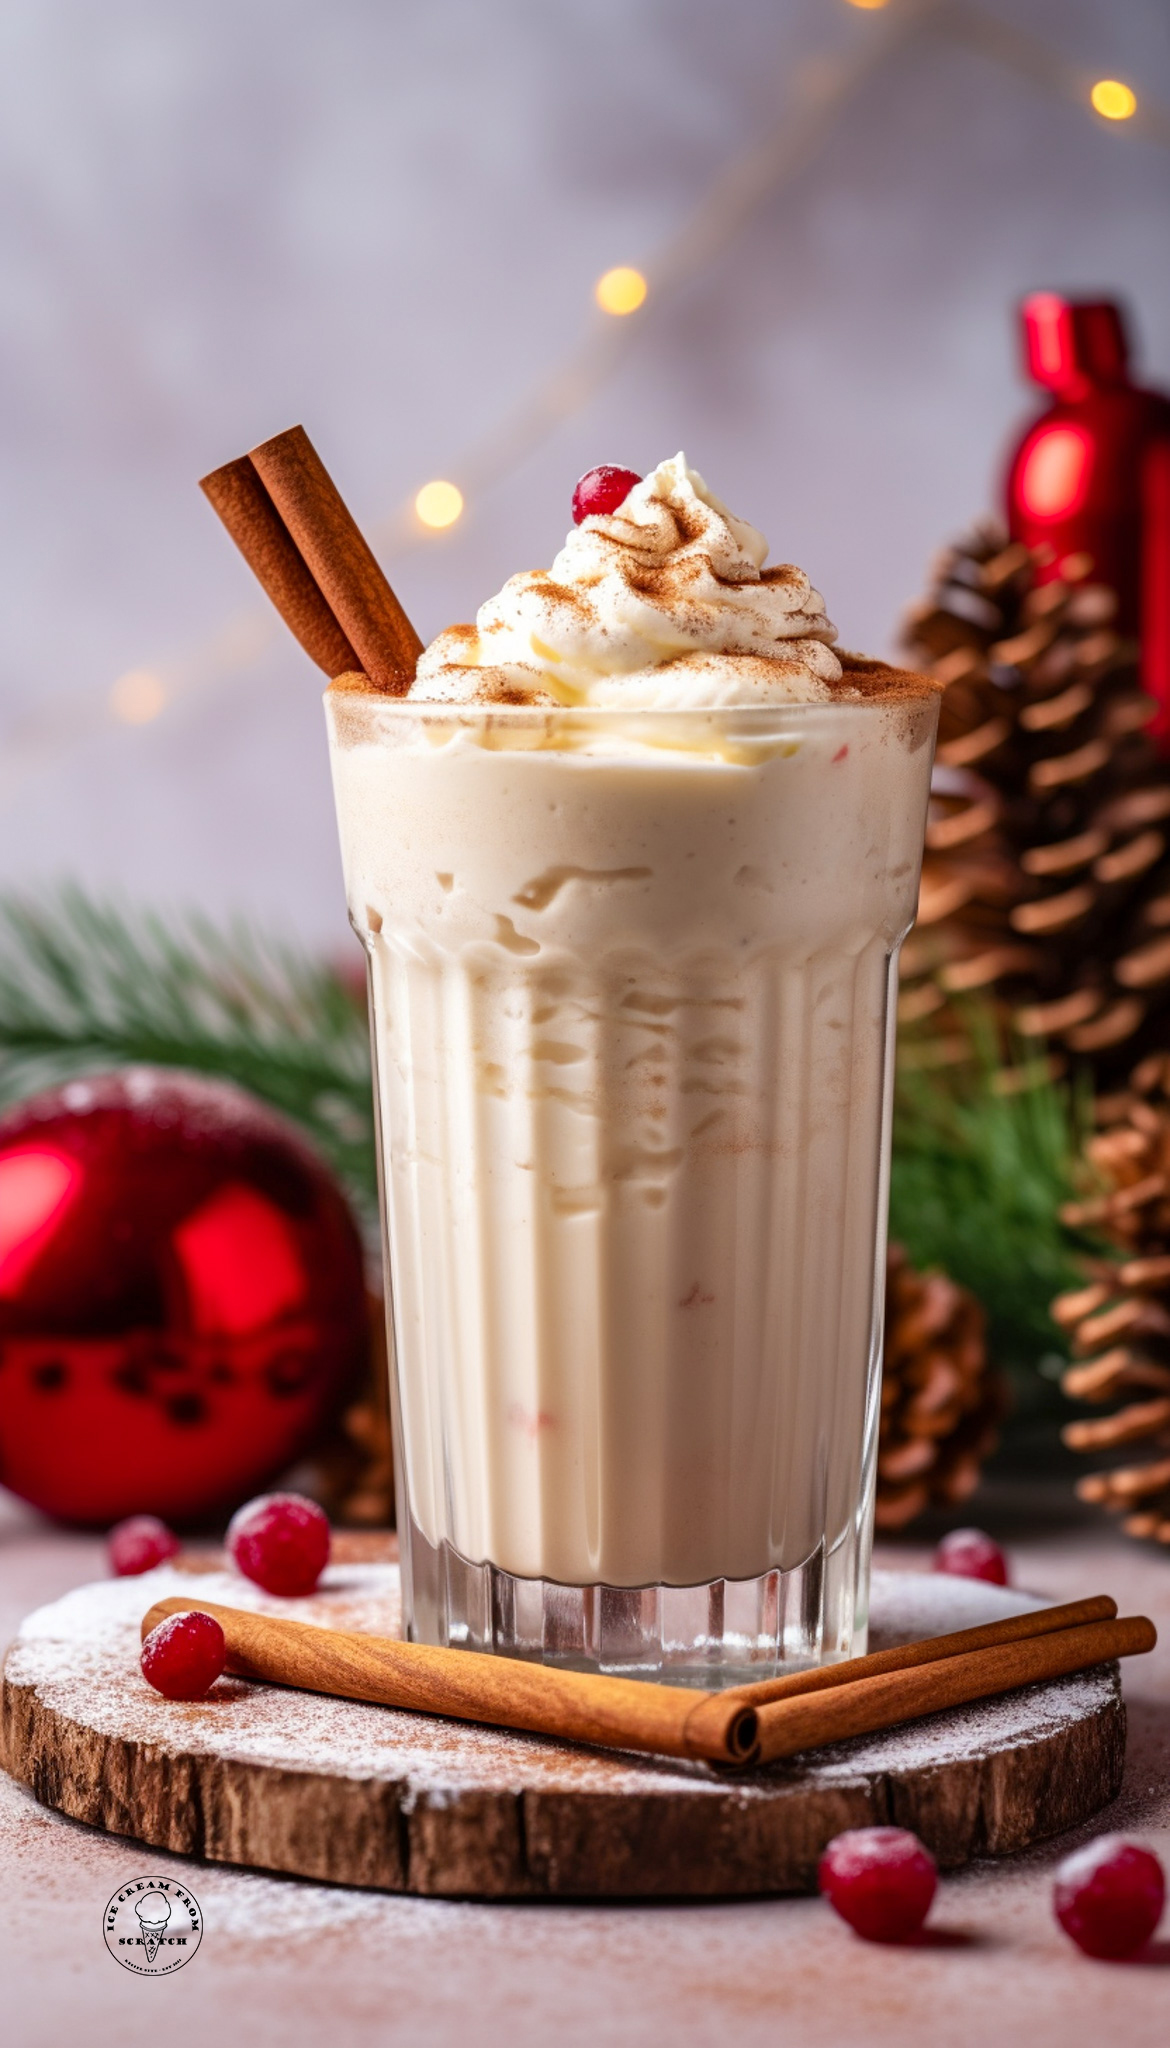 An eggnog milkshake in a tall glass, garnished with cinnamon sticks, whipped cream, and a cranberry. In the background are red ornaments, greenery, and pinecones.